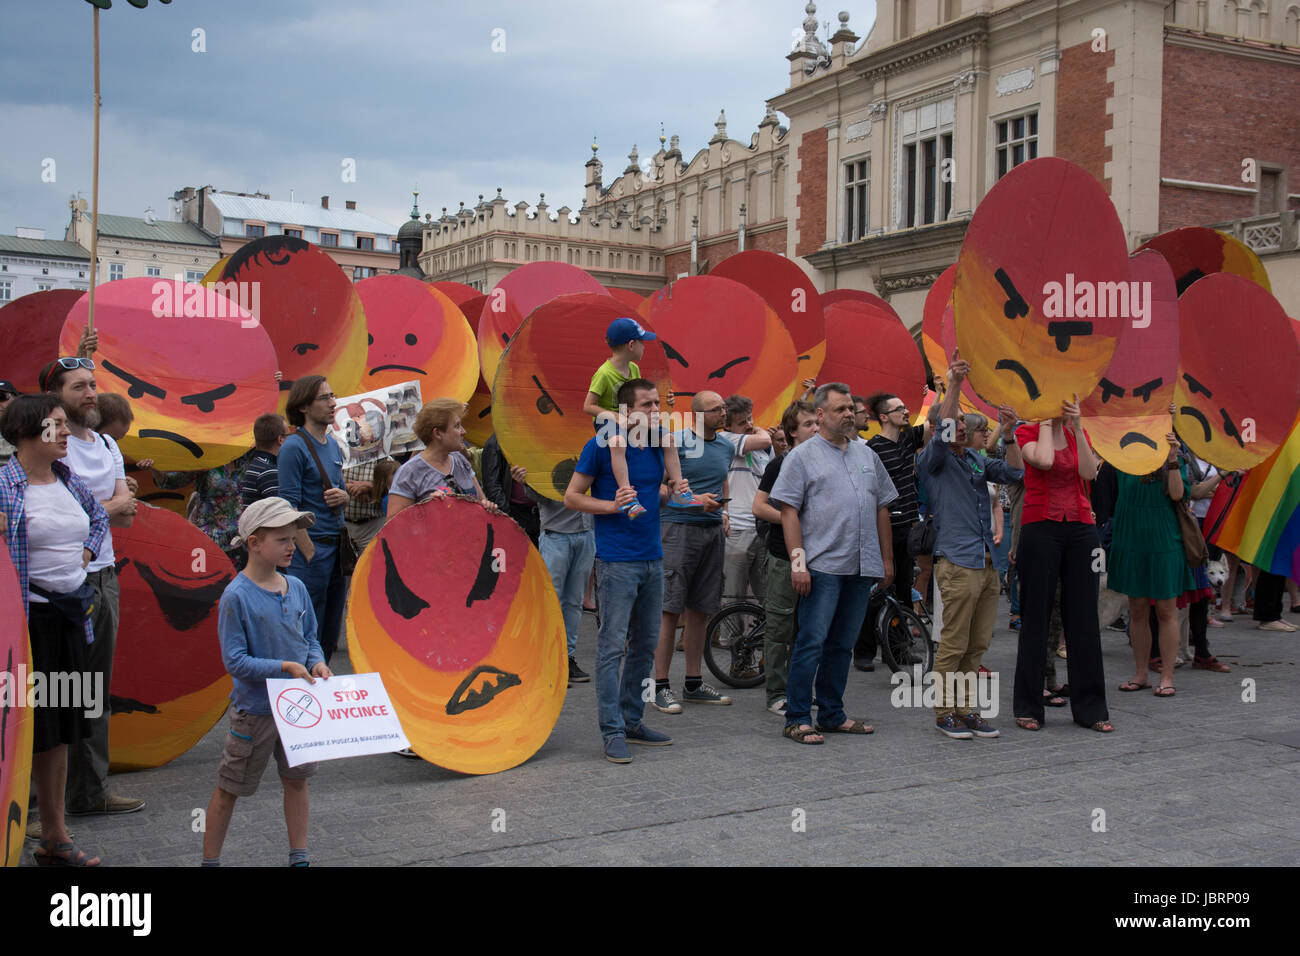 Cracow, Poland. 12th Jun, 2017. Protest against the large scale logging at Bialowieza forest, an Unesco natural world heritage site in Cracow, Poland on June 12, 2017.The Minister of the Environment Jan Szyszko believes that cutting down trees will help prevent the spread of European spruce bark beetle, while scientists, ecologists and Poles are afraid of degrading habitats of many animal species and losing their national heritage. Credit: Iwona Fijoł/Alamy Live News Stock Photo